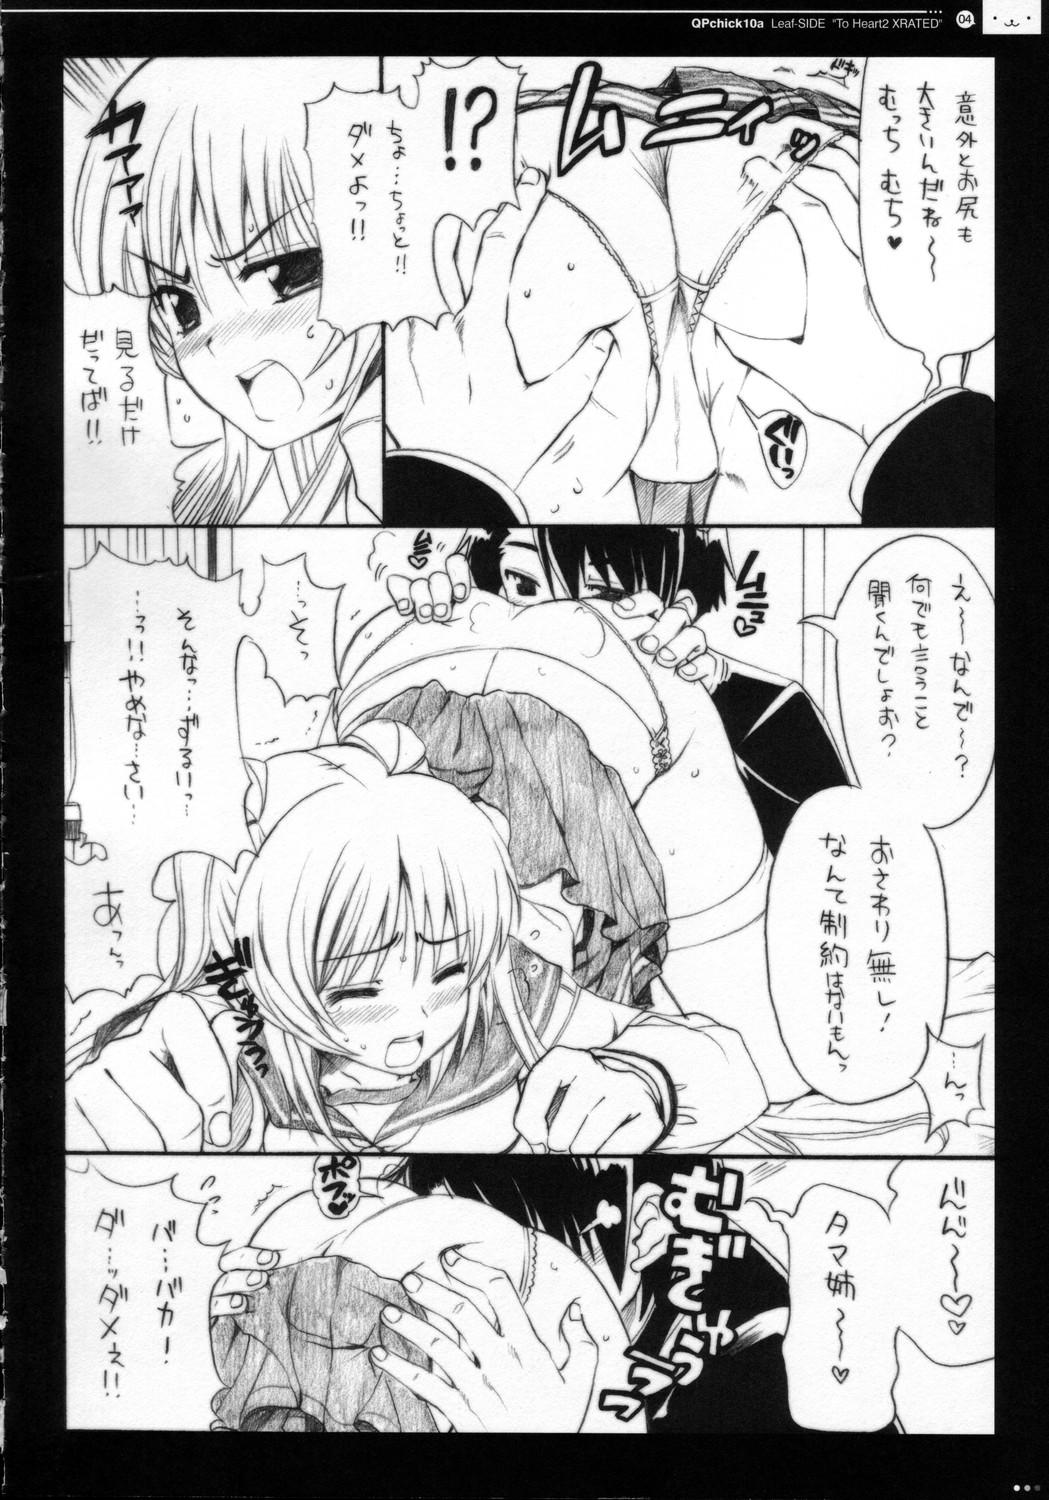 Hardcorend (C69) [QP:flapper (Pimeco, Tometa)] QPchick10a Leaf-SIDE -Re:Re:CHERRY- (ToHeart 2) - Toheart2 Shower - Page 7